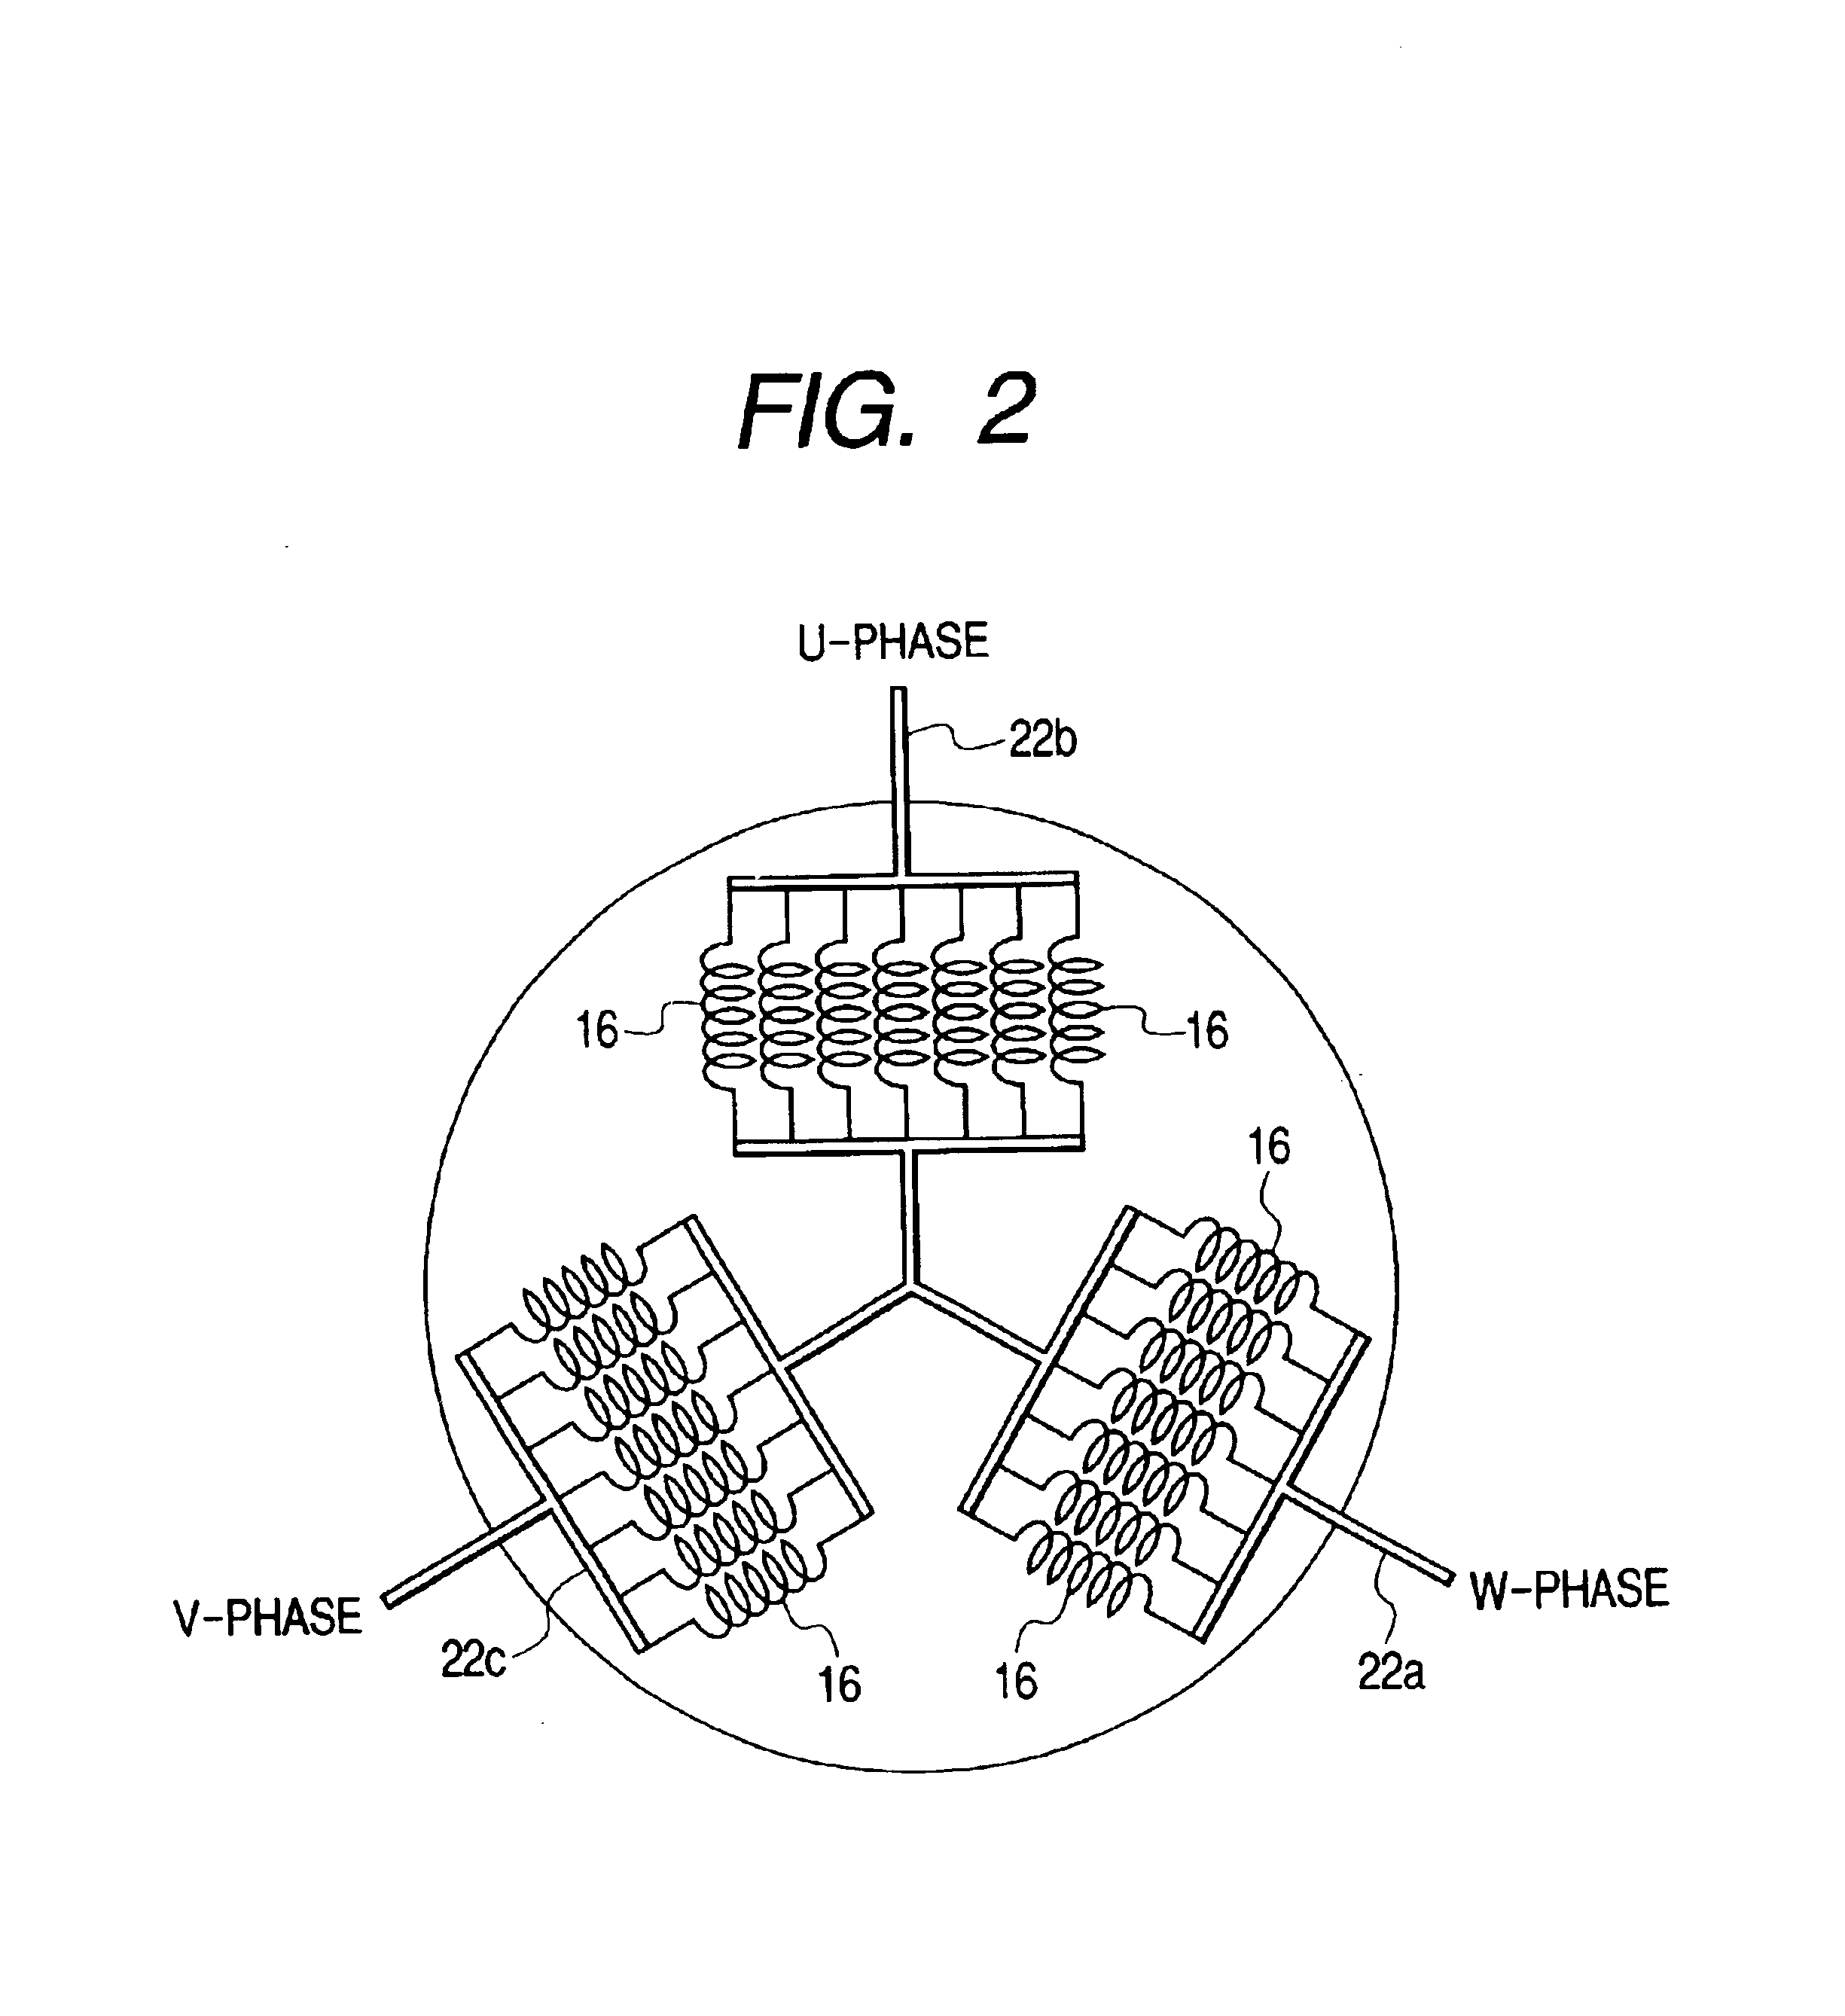 Thin brushless motor having resin-insulated concentric ring-shaped bus bars